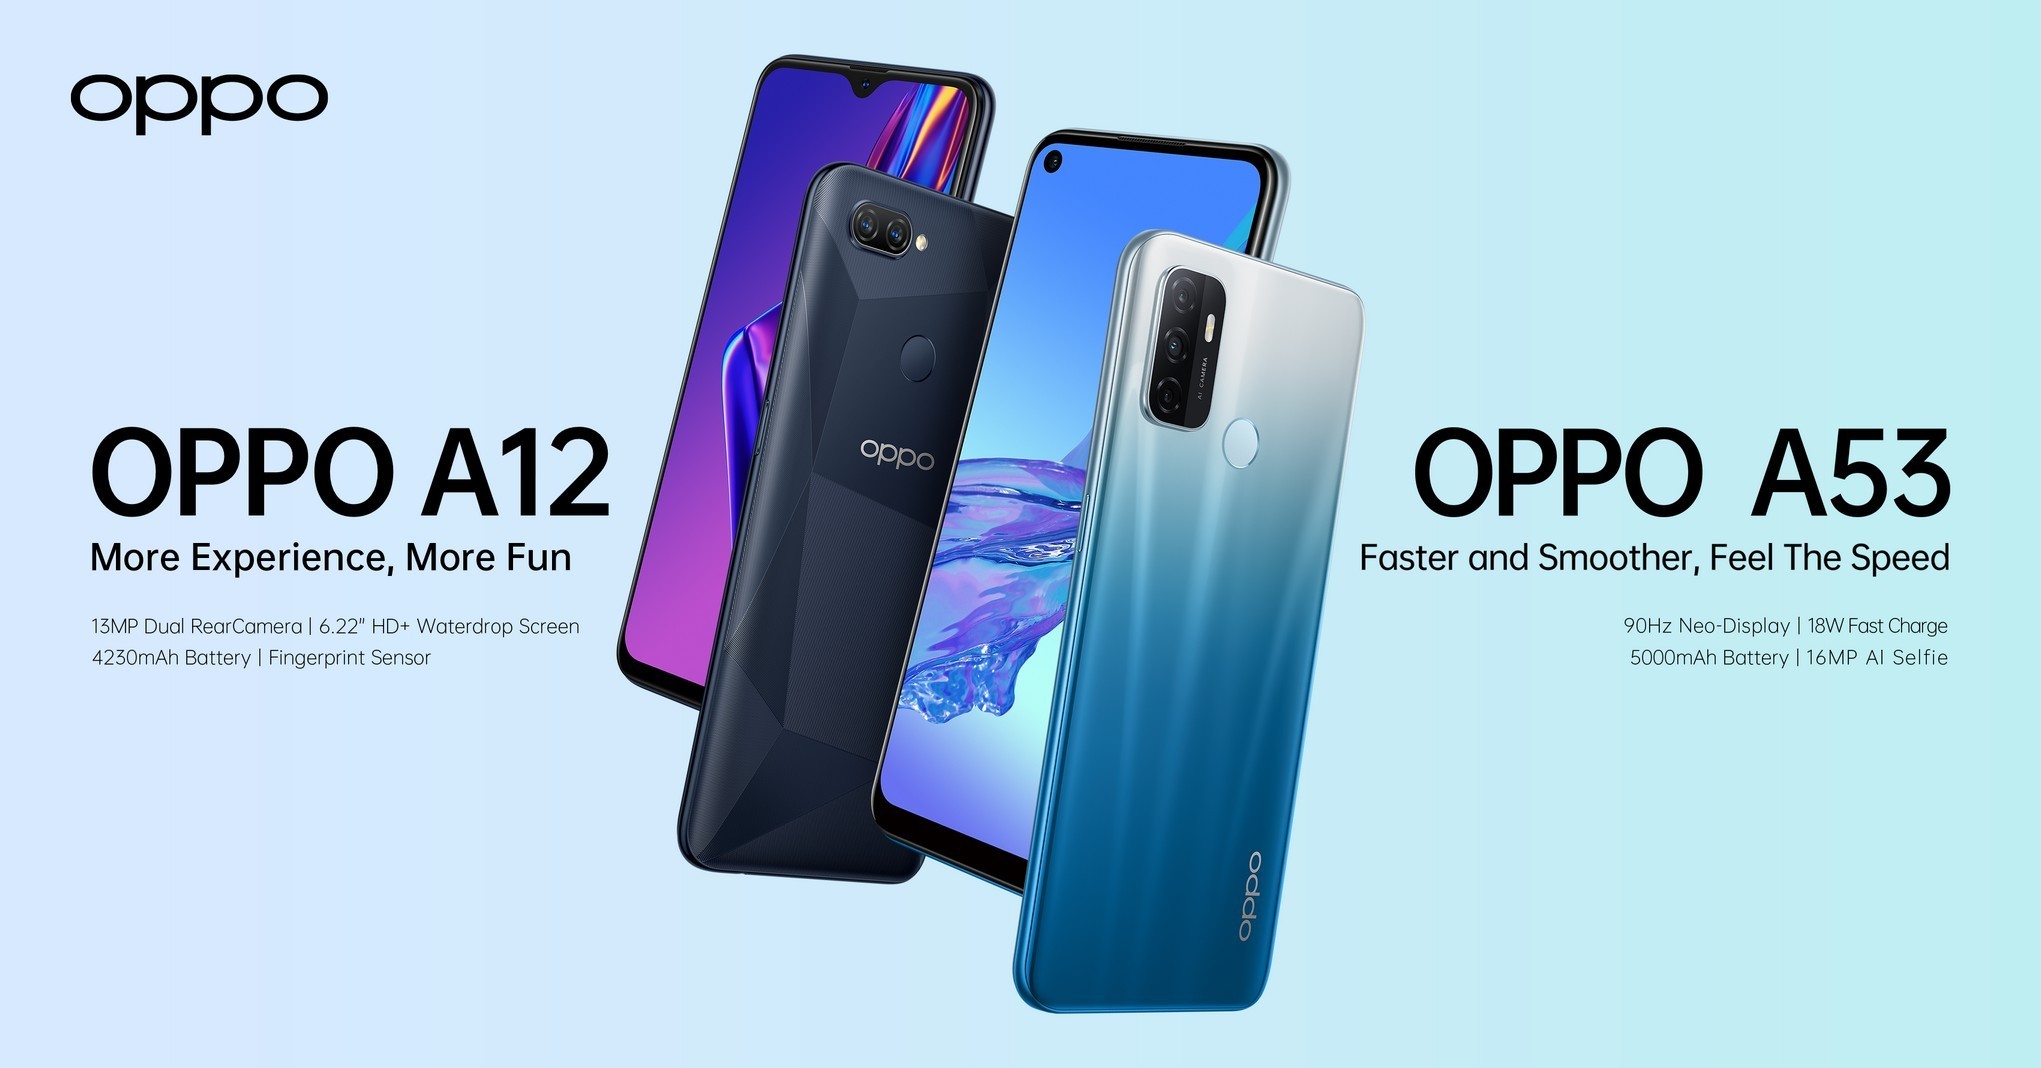 OPPO releases the A53 (4GB) and A12 budget smartphones in the Philippines